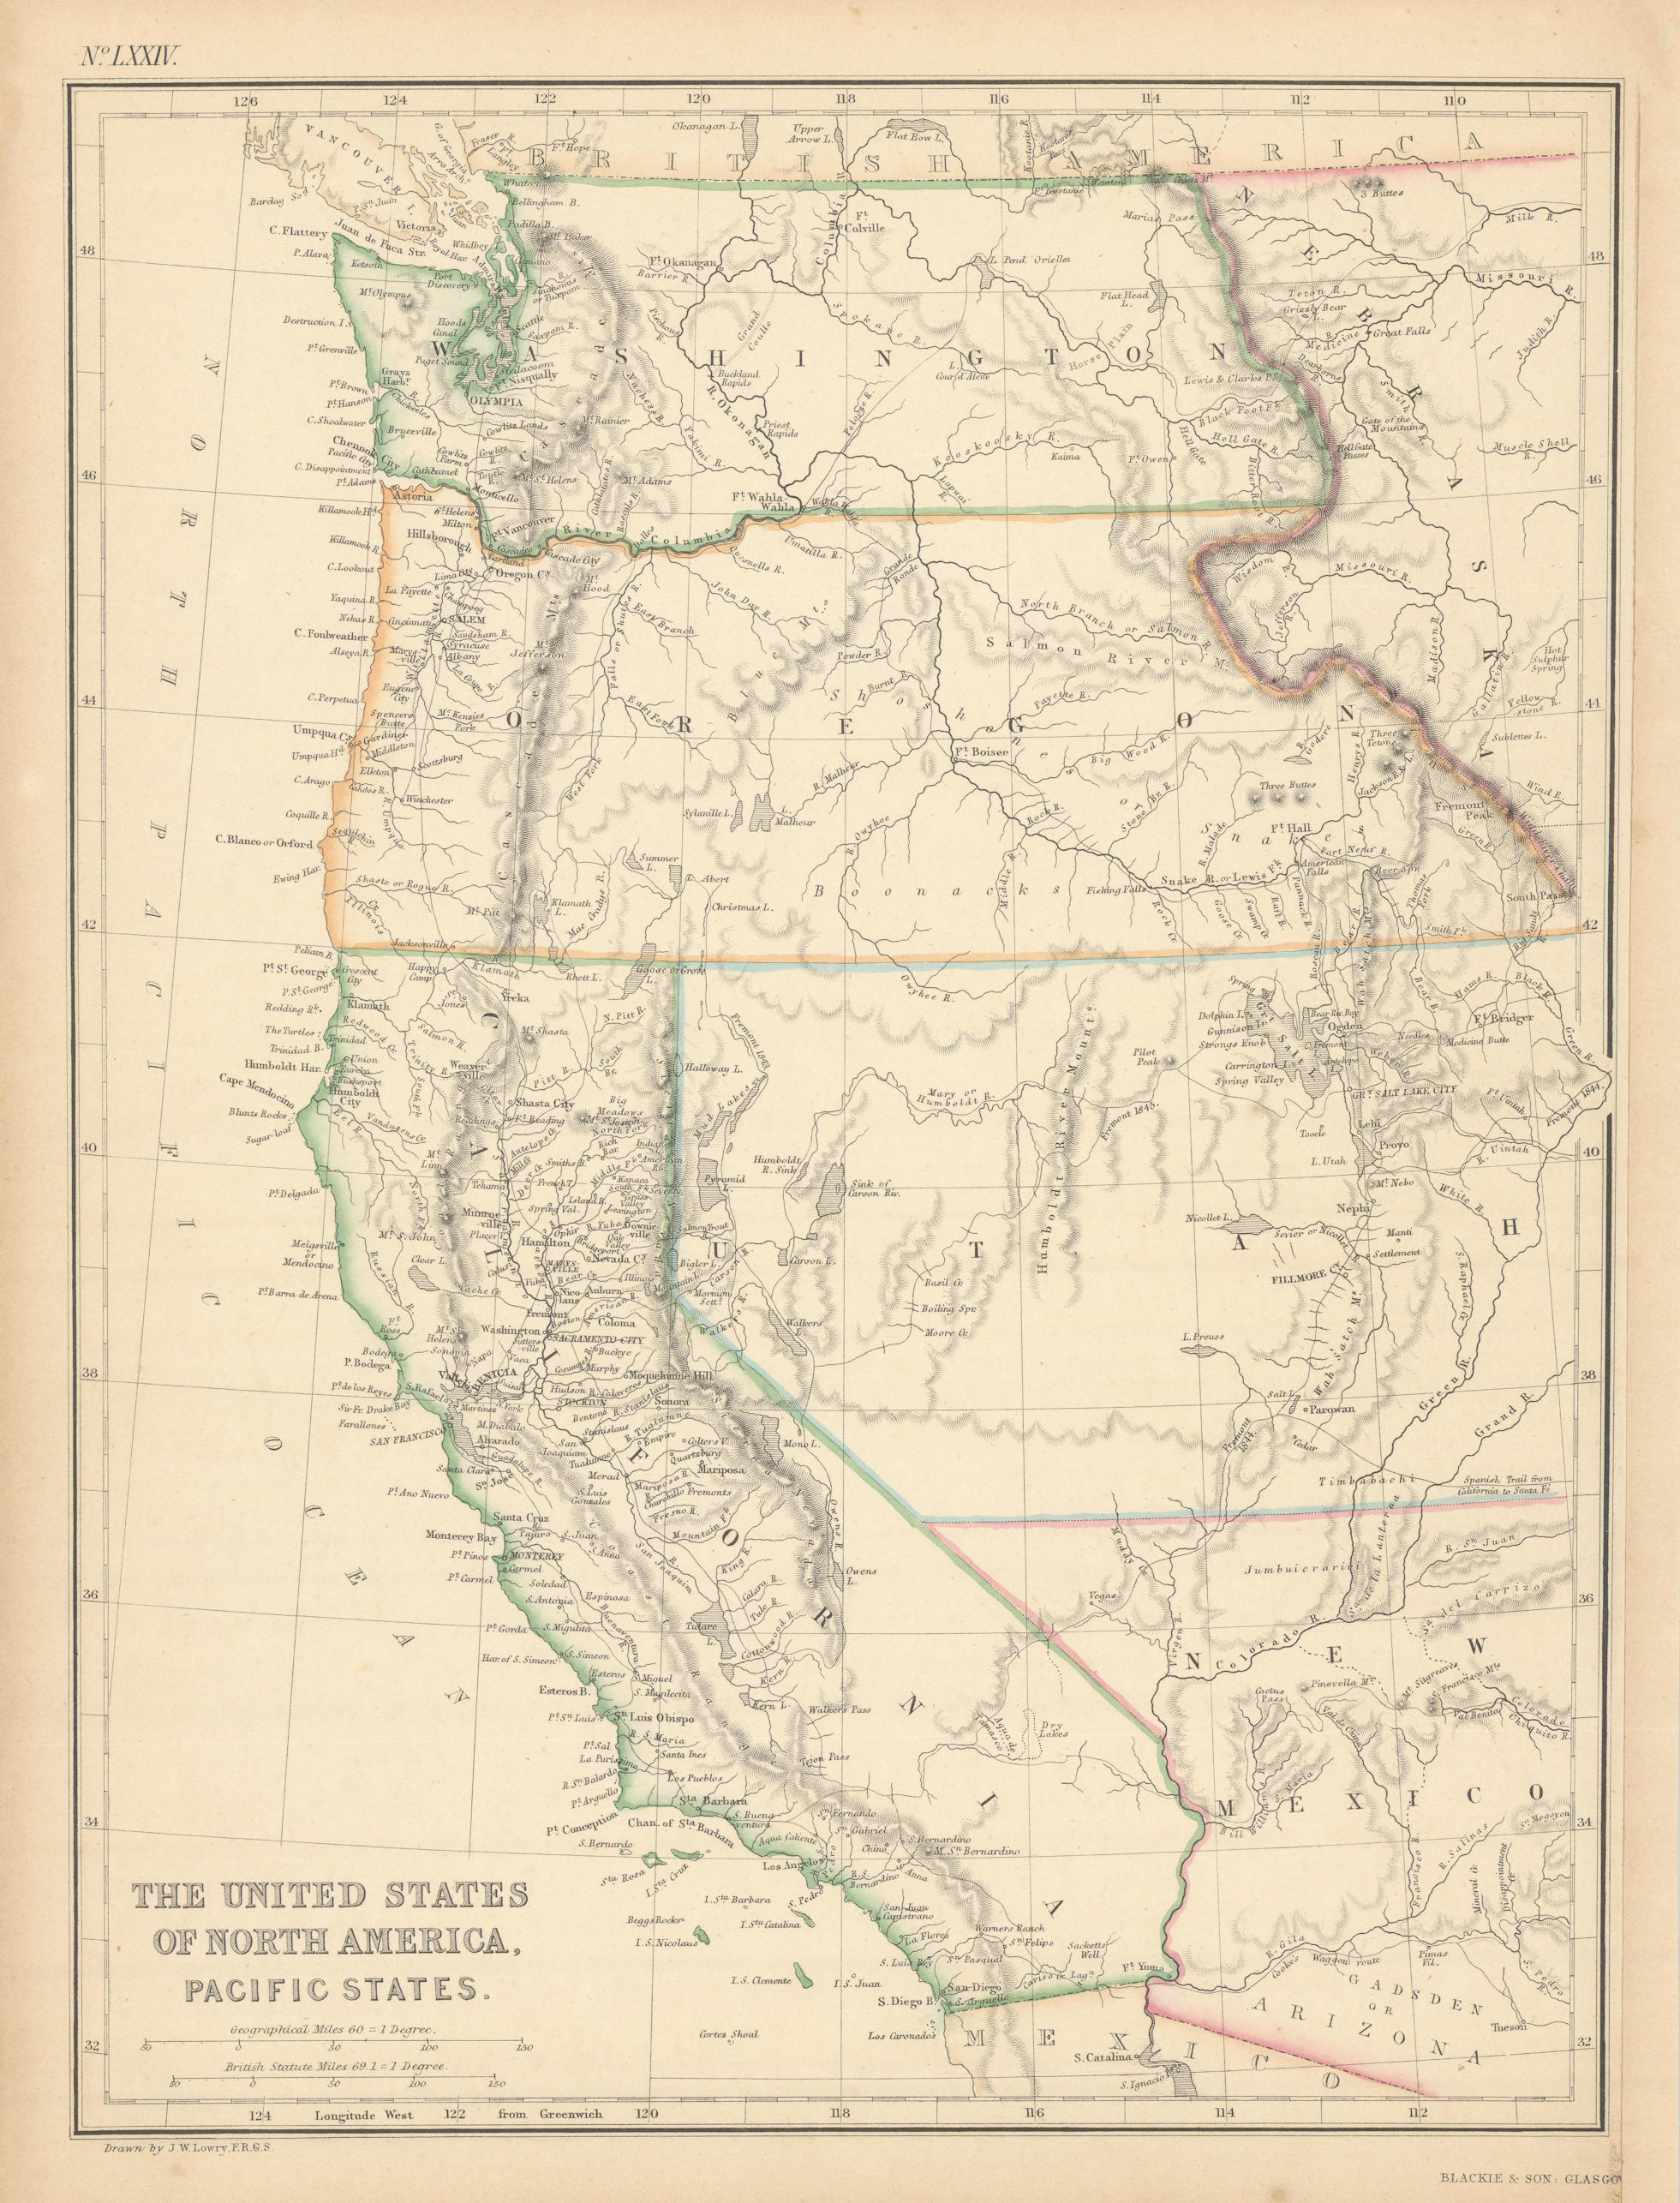 Associate Product United States of North America, Pacific States by Joseph Wilson Lowry 1859 map